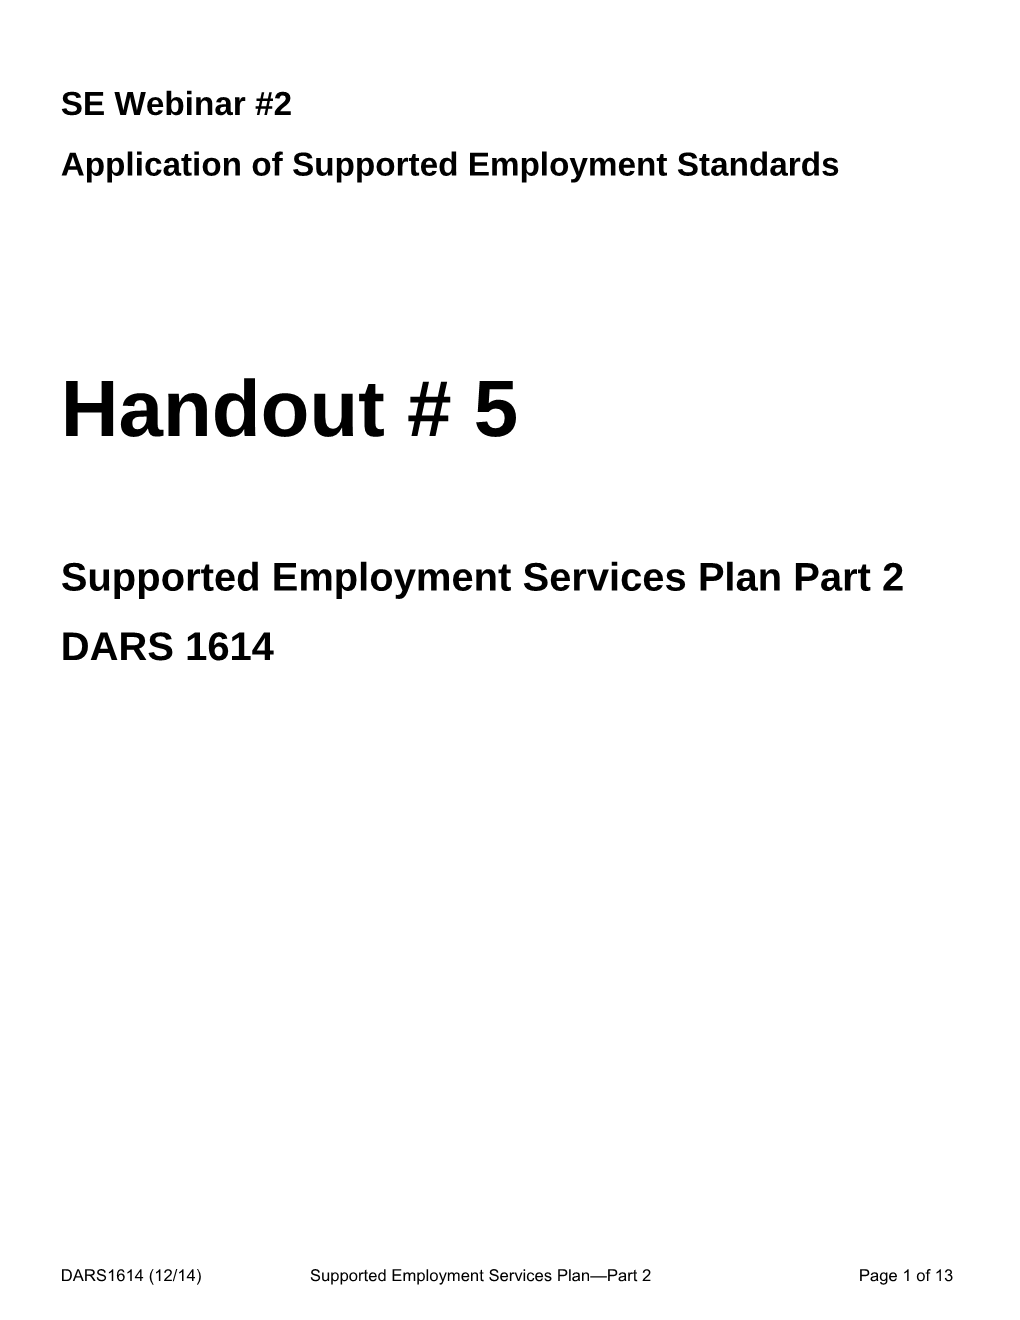 Supported Employment Services Plan Part 2